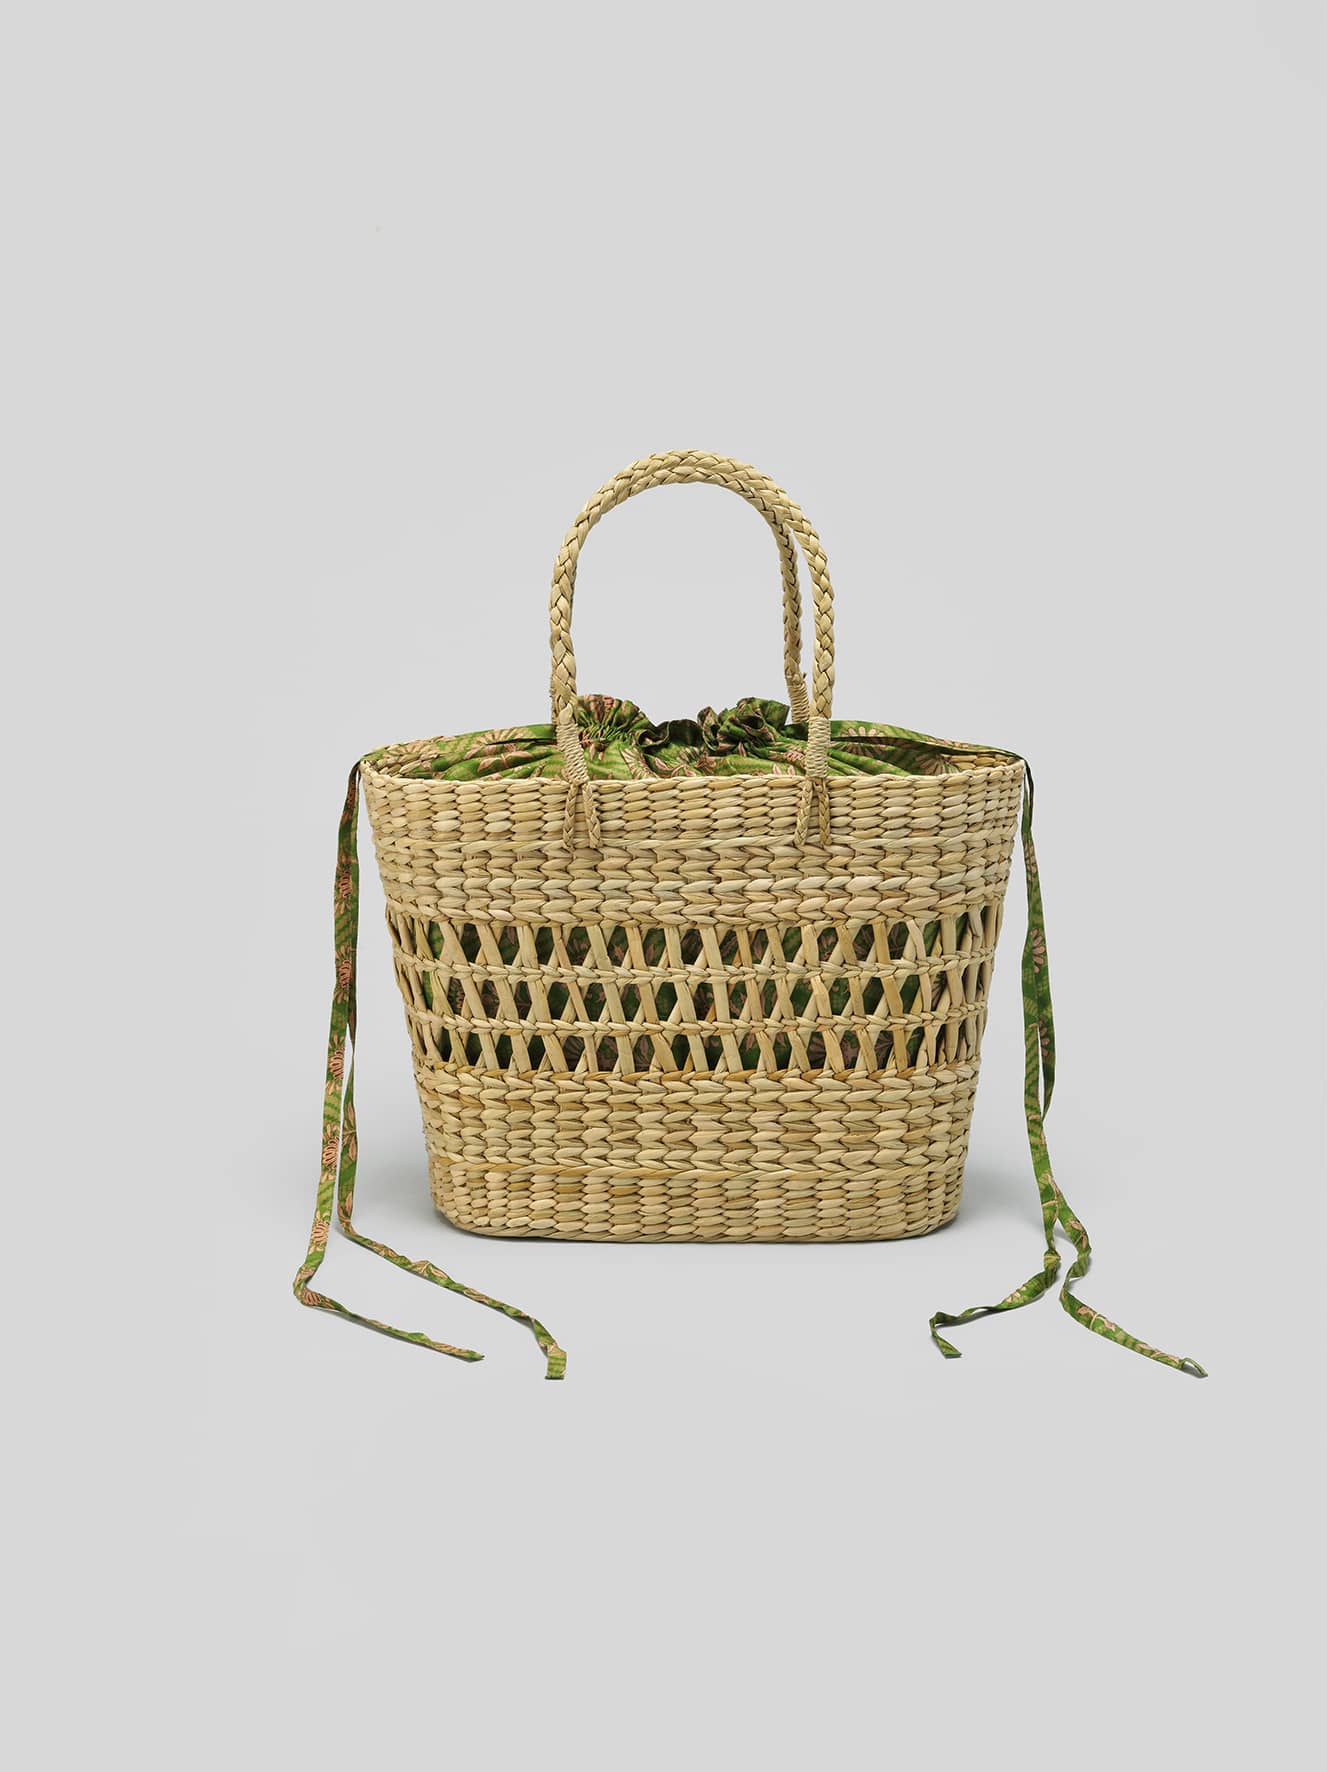 Oversized Straw bags - Green tones